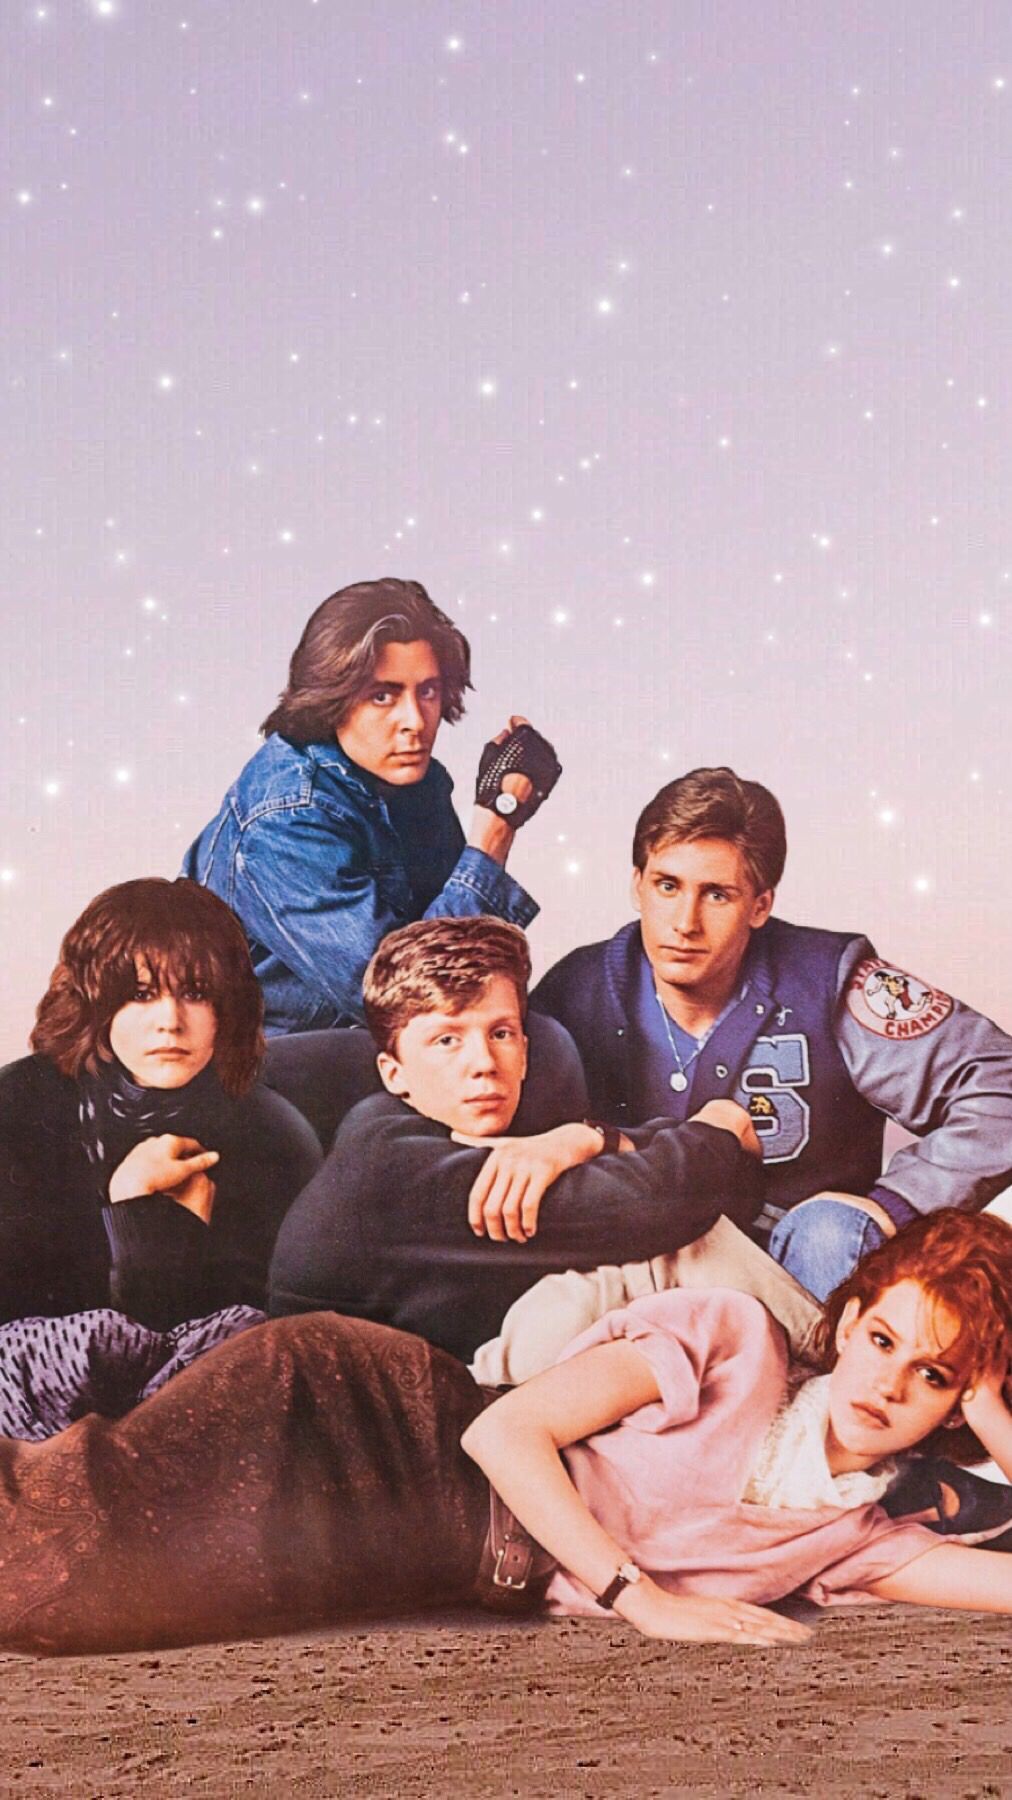 The Breakfast Club wallpaper for your phone or desktop background. - 80s